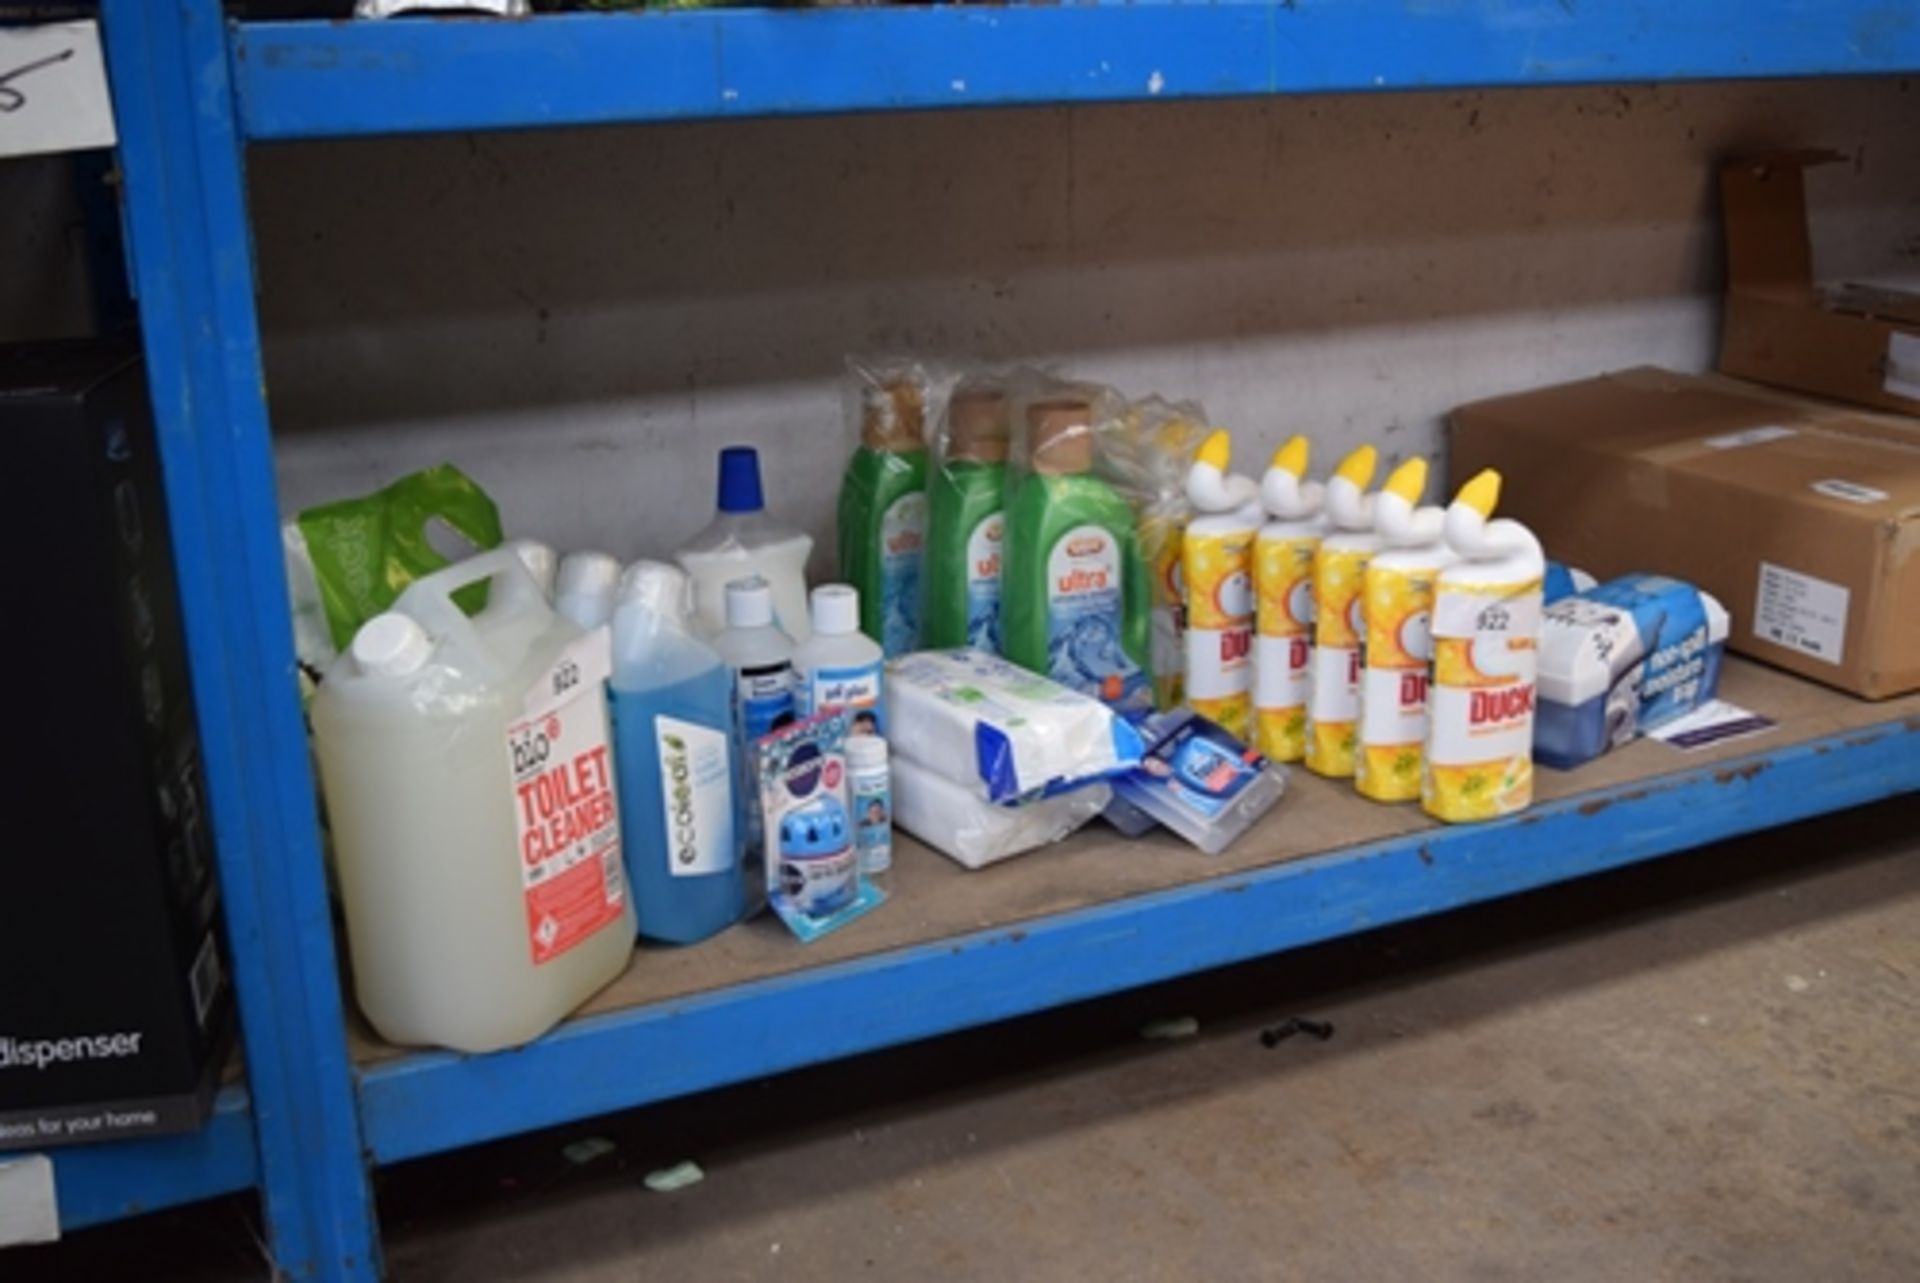 A lot of cleaning products including Toilet Duck, moisture traps, toilet cleaner, carpet cleaner